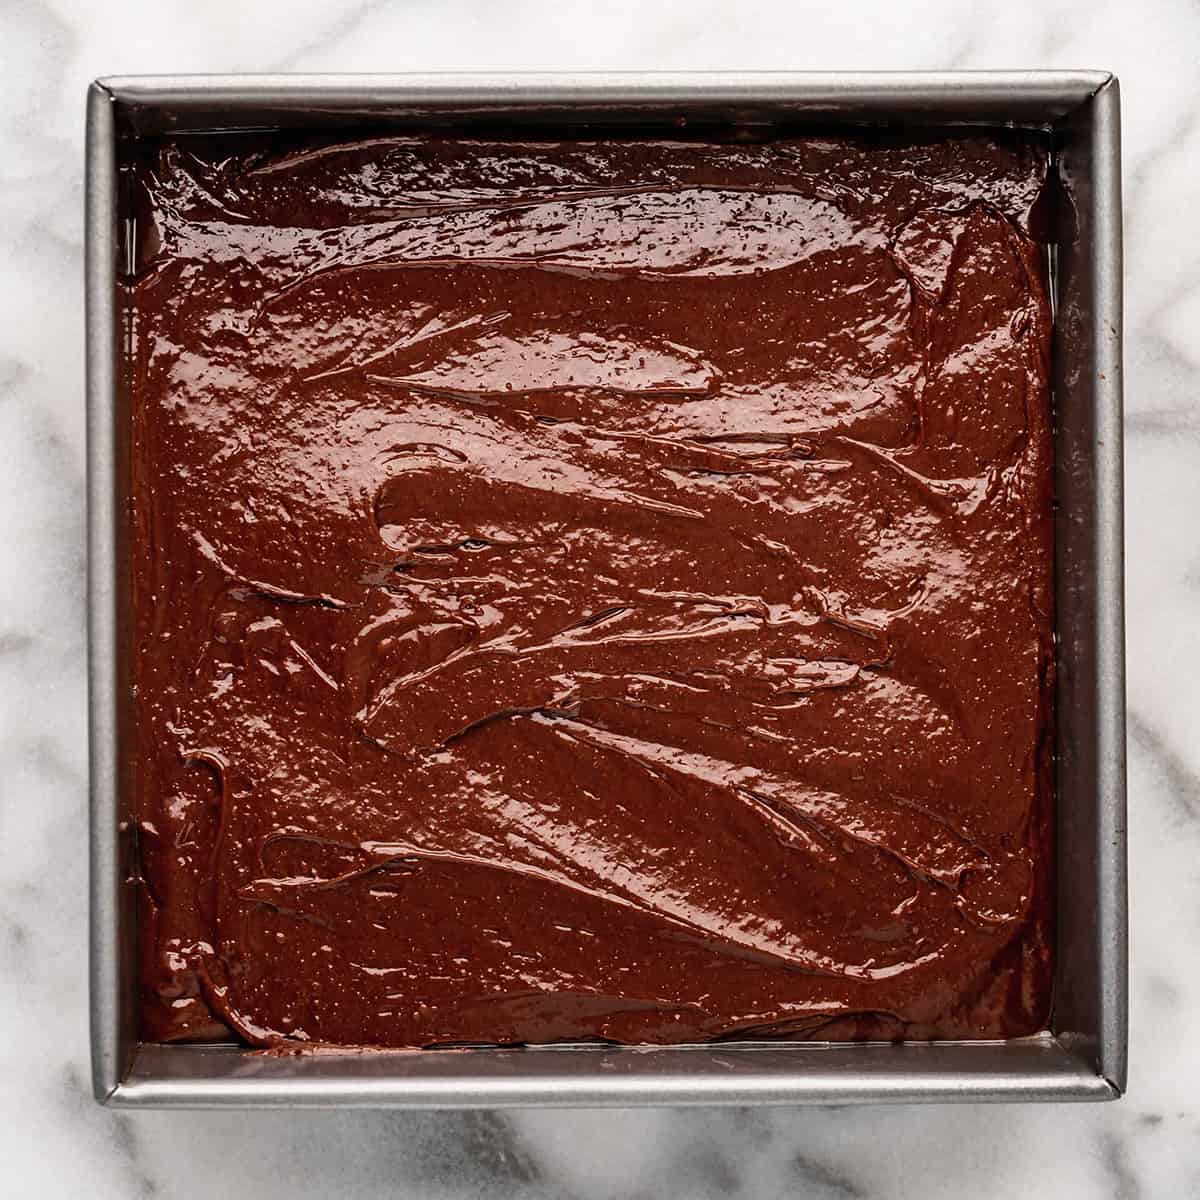 brownie batter in a pan before baking